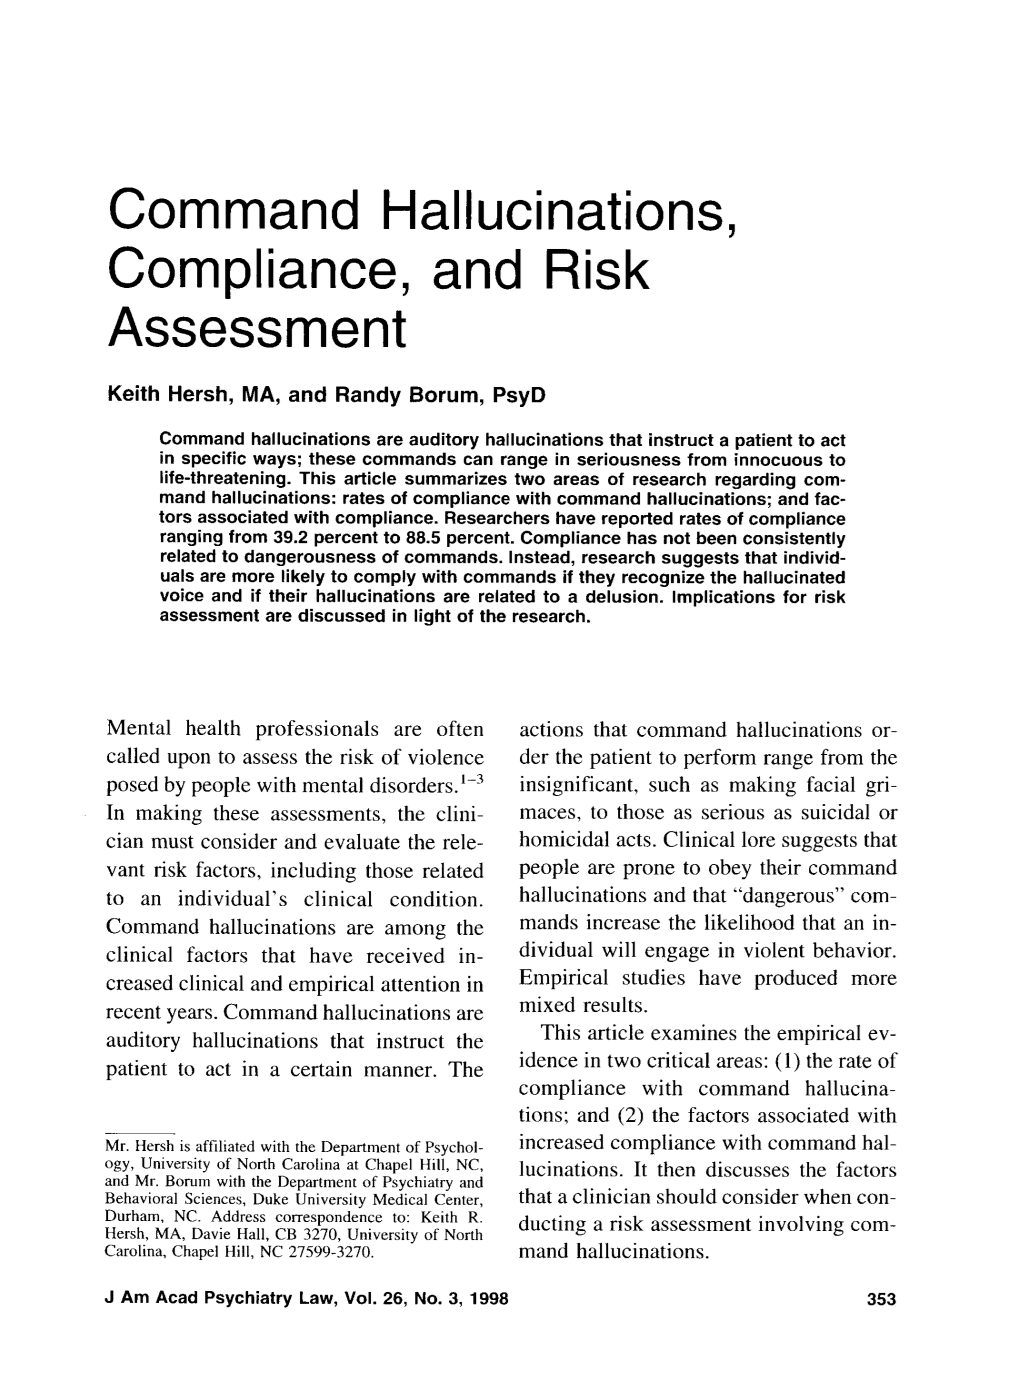 Command Hallucinations, Compliance, and Risk Assessment